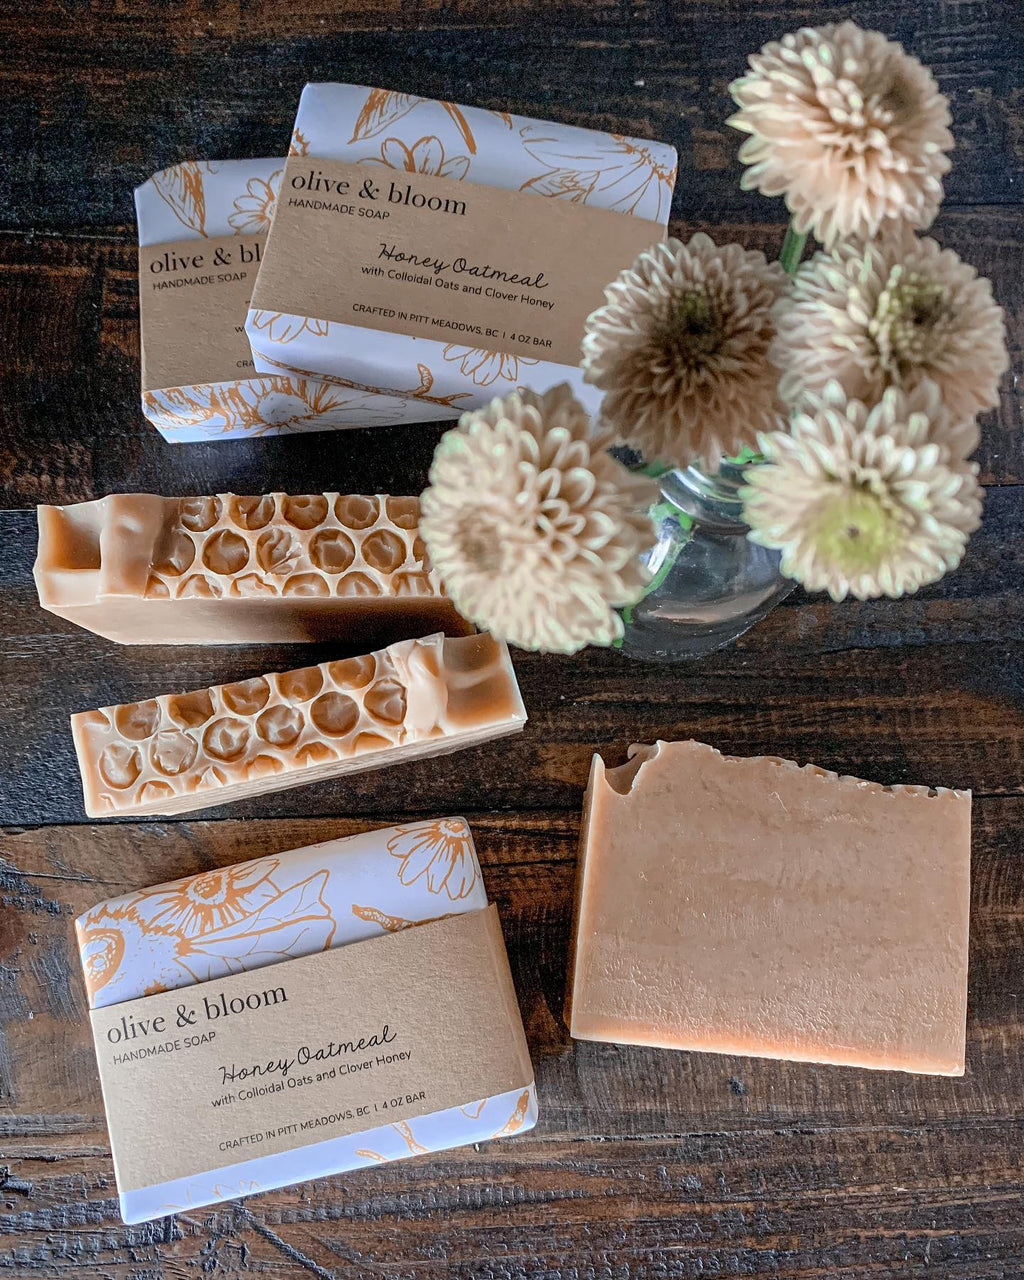 Honey & Oatmeal - Hand Crafted Bar Soap | Olive & Bloom